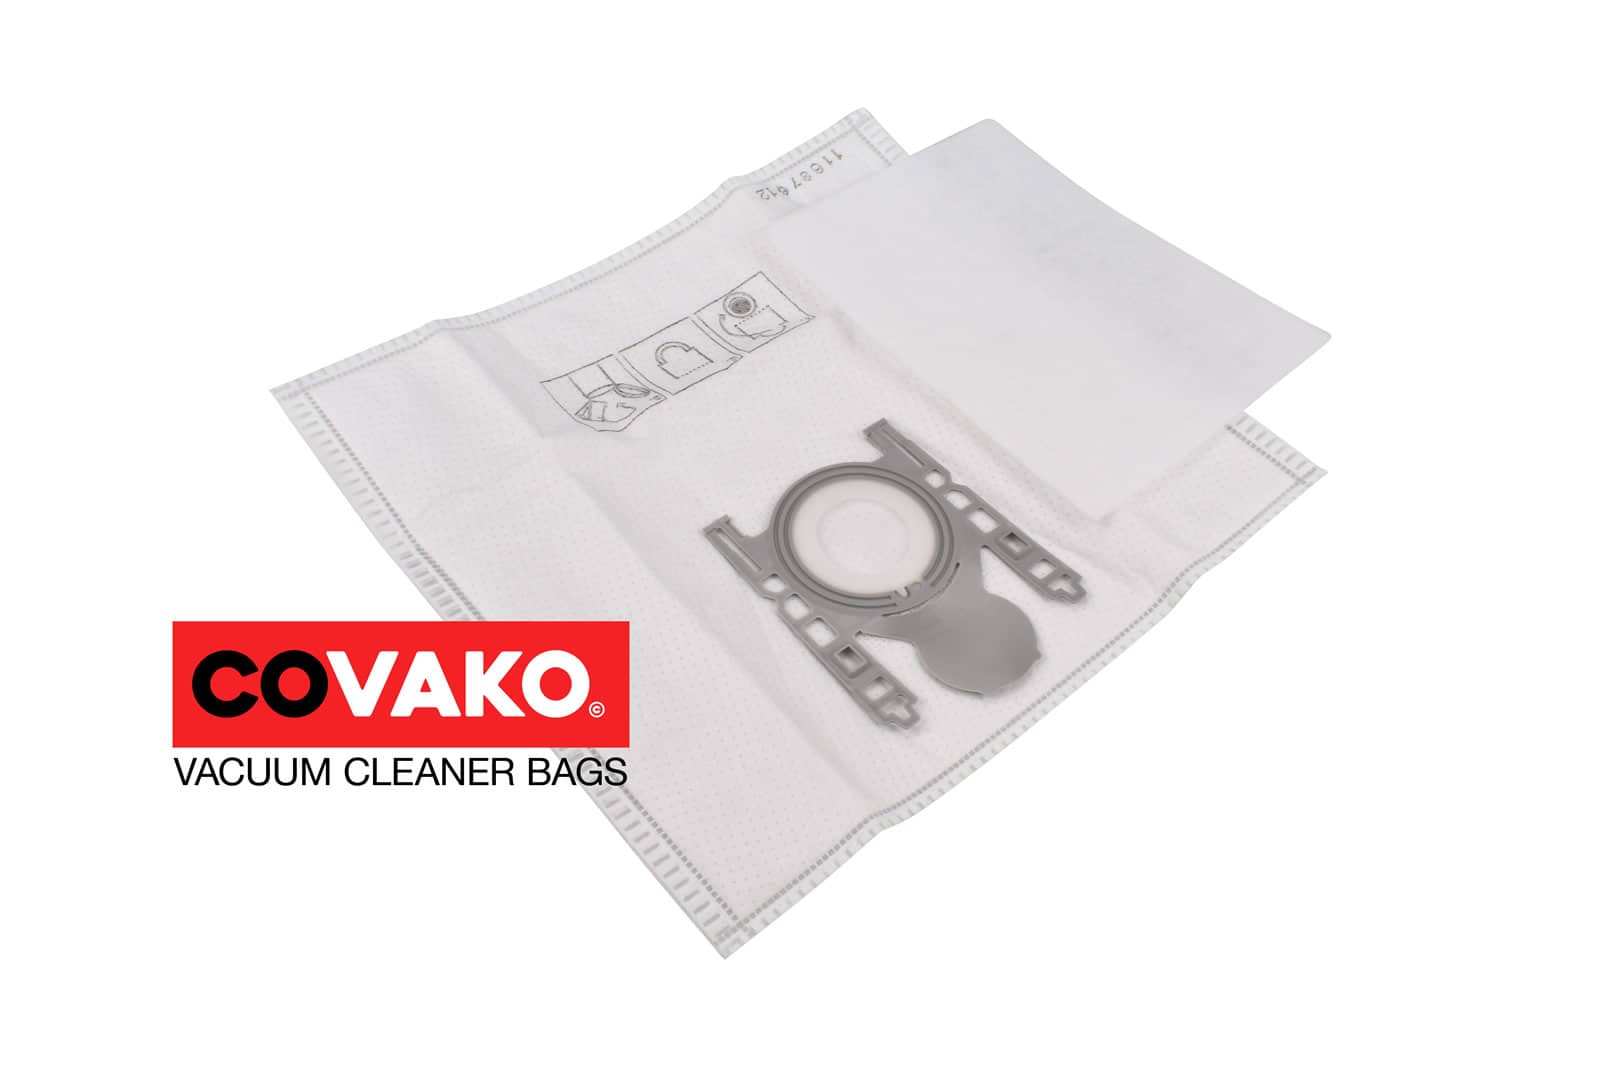 Bosch BSGL 5 Pro 1 / Synthesis - Bosch vacuum cleaner bags